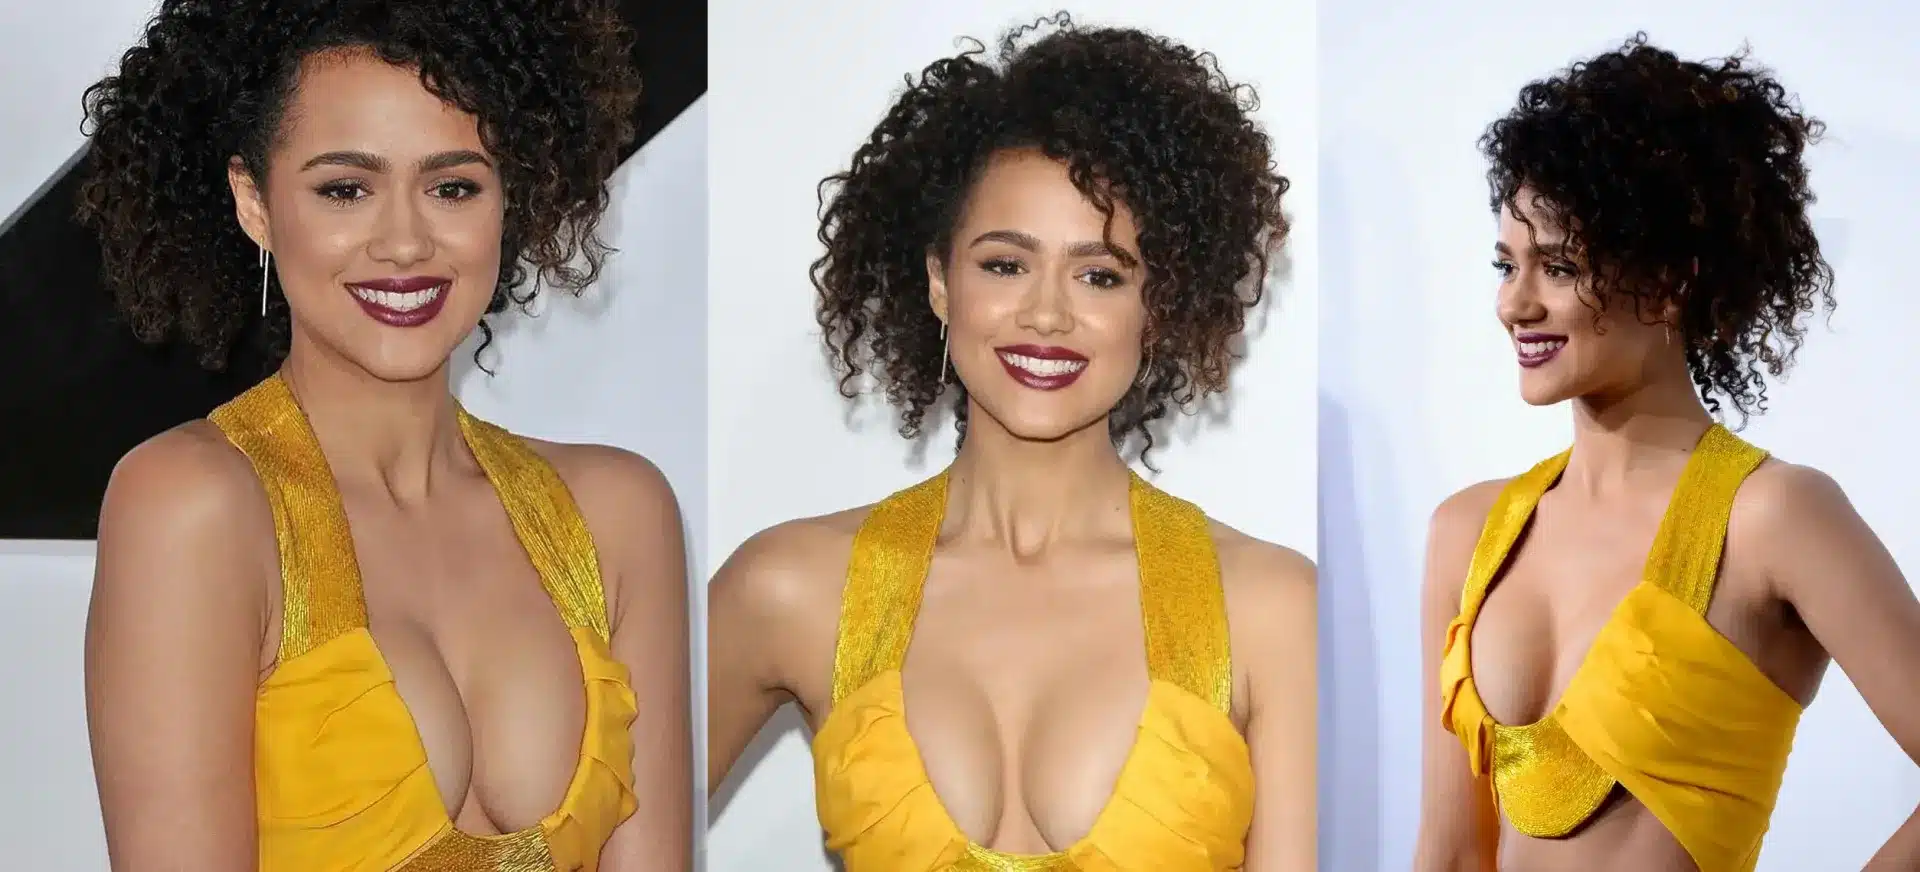 Nathalie Emmanuel Appears Beautiful As She Leaps Out In Nyc